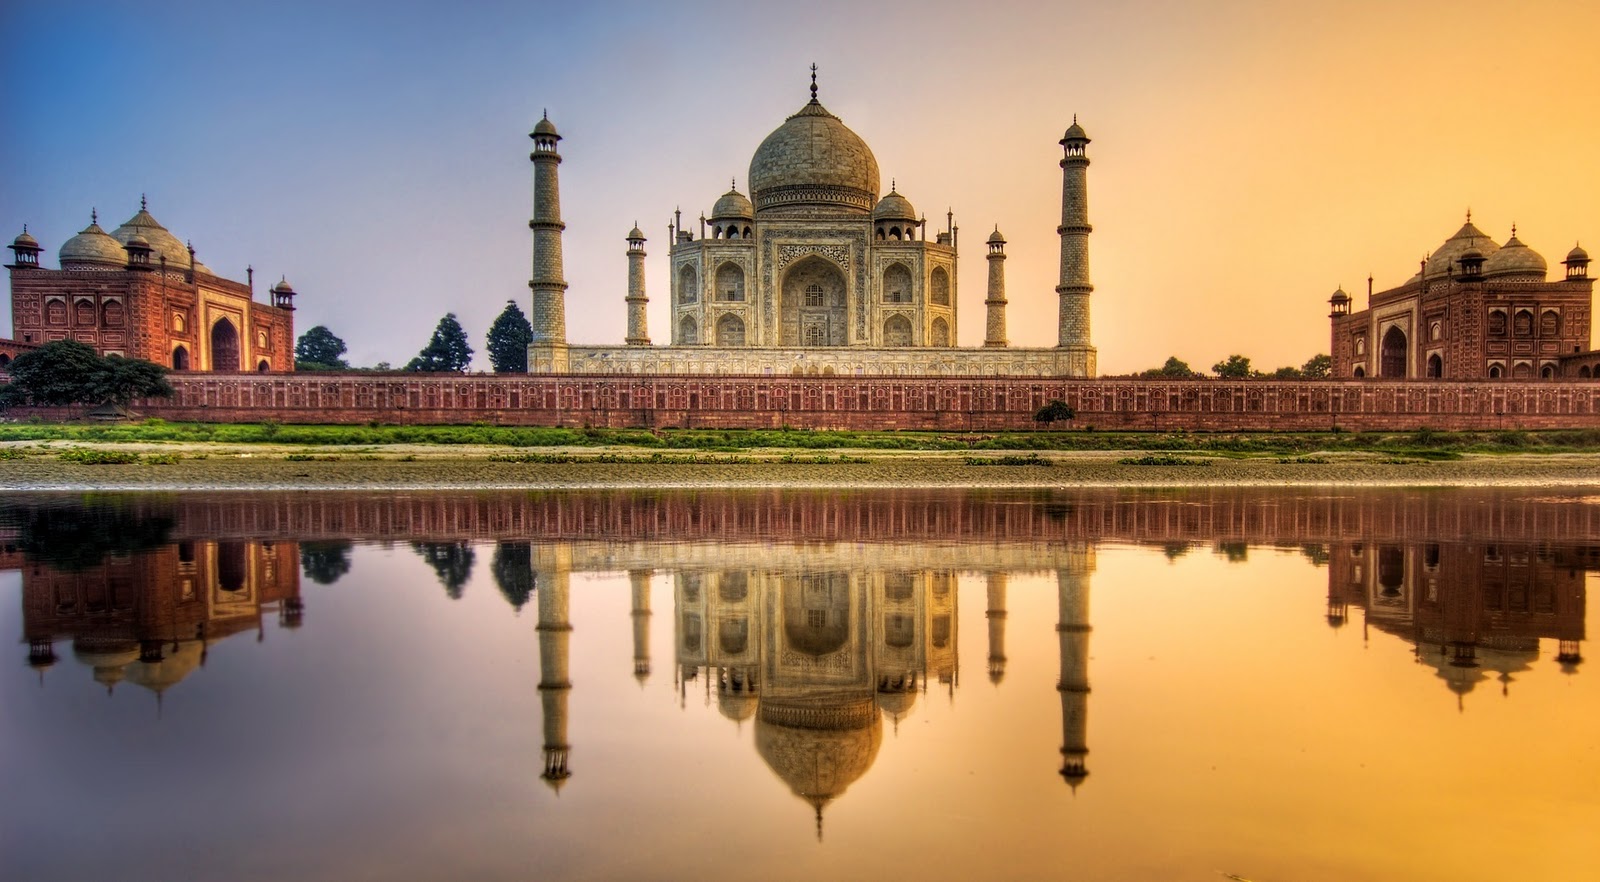 India Best Travels